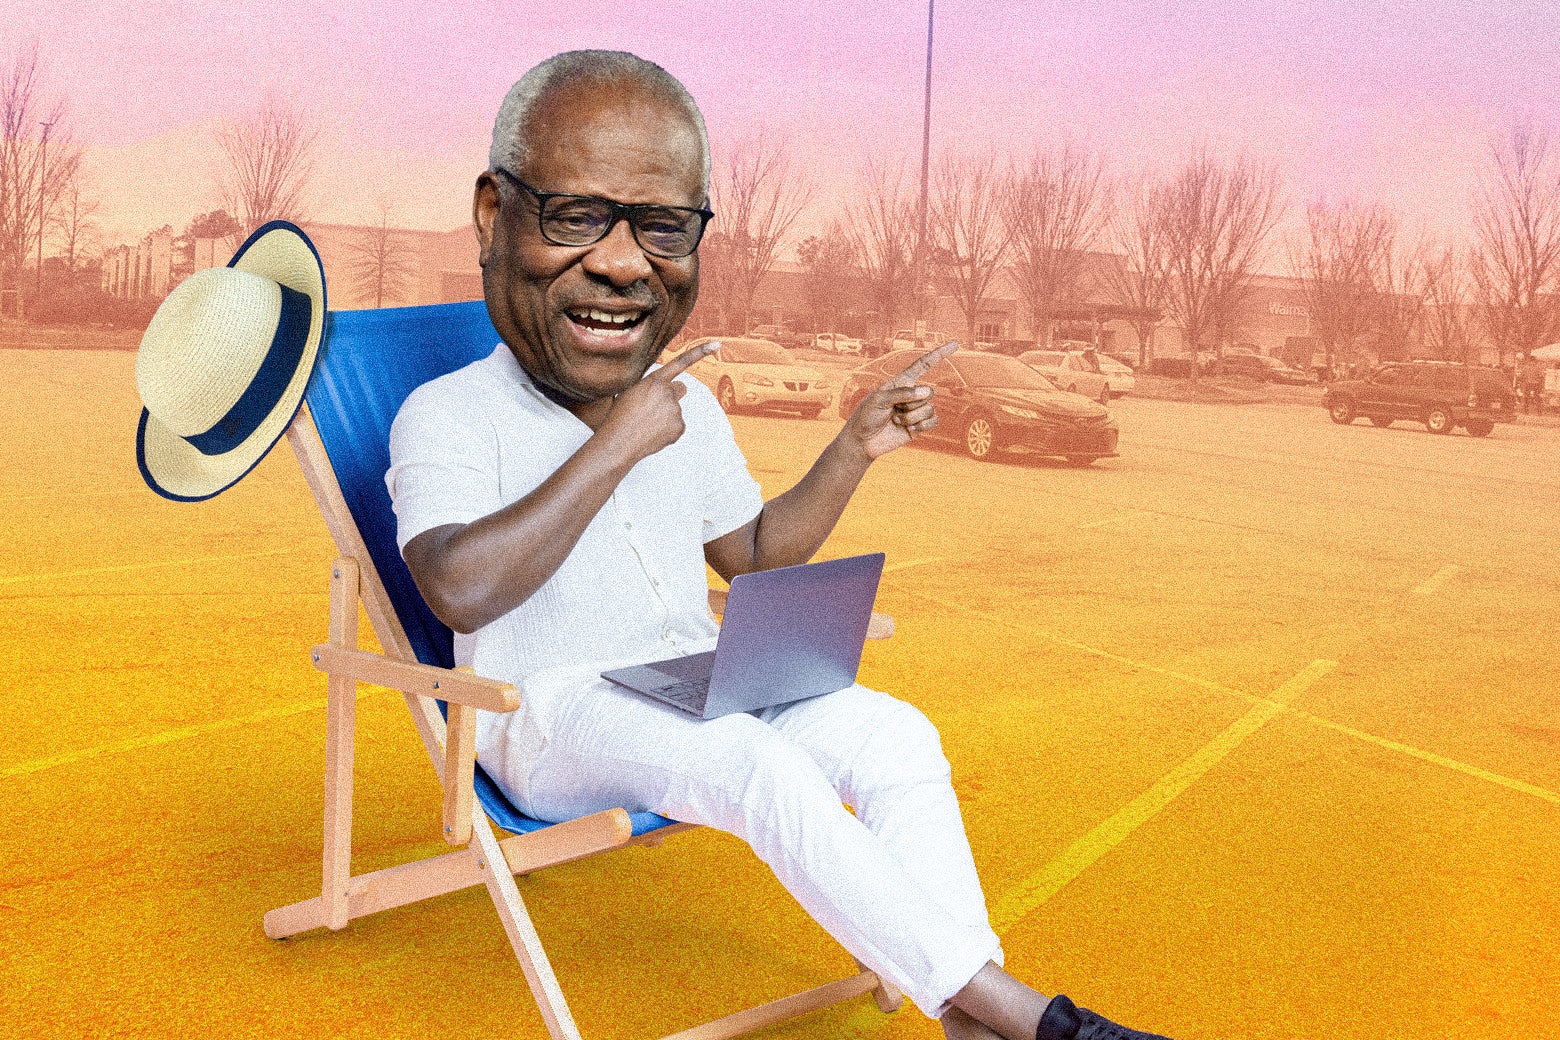 Hang On, Clarence Thomas Said He Prefers Hanging Out in “Walmart Parking Lots” to the Beach?